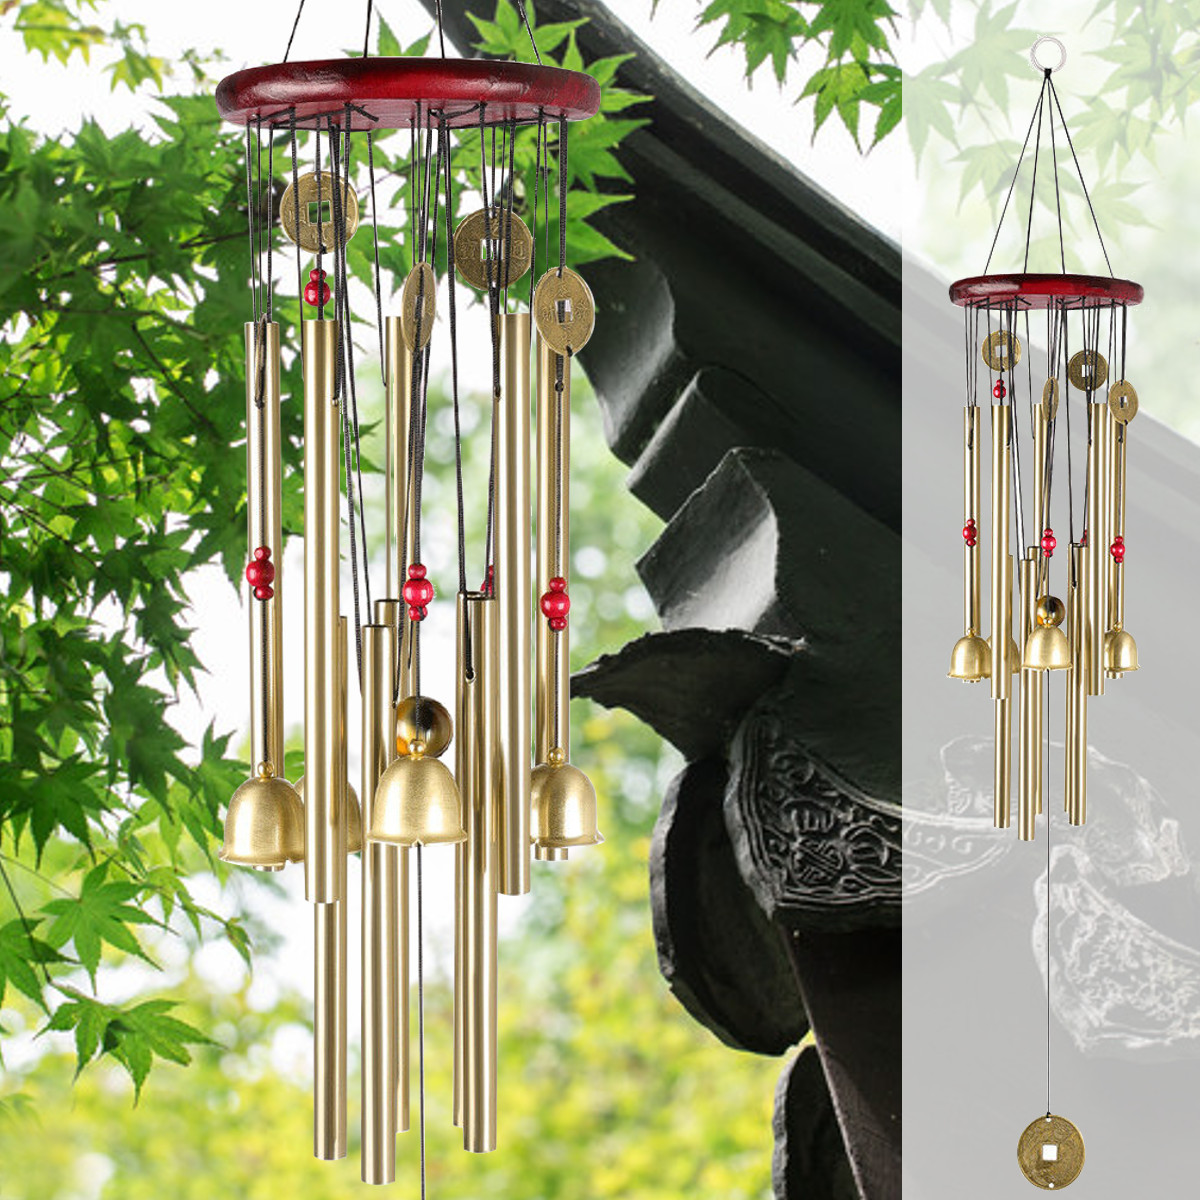 Wind-Chimes-Large-Tone-Resonant-Bell-10-Tubes-Chapel-Church-Garden-Decor-33quot-1694339-3